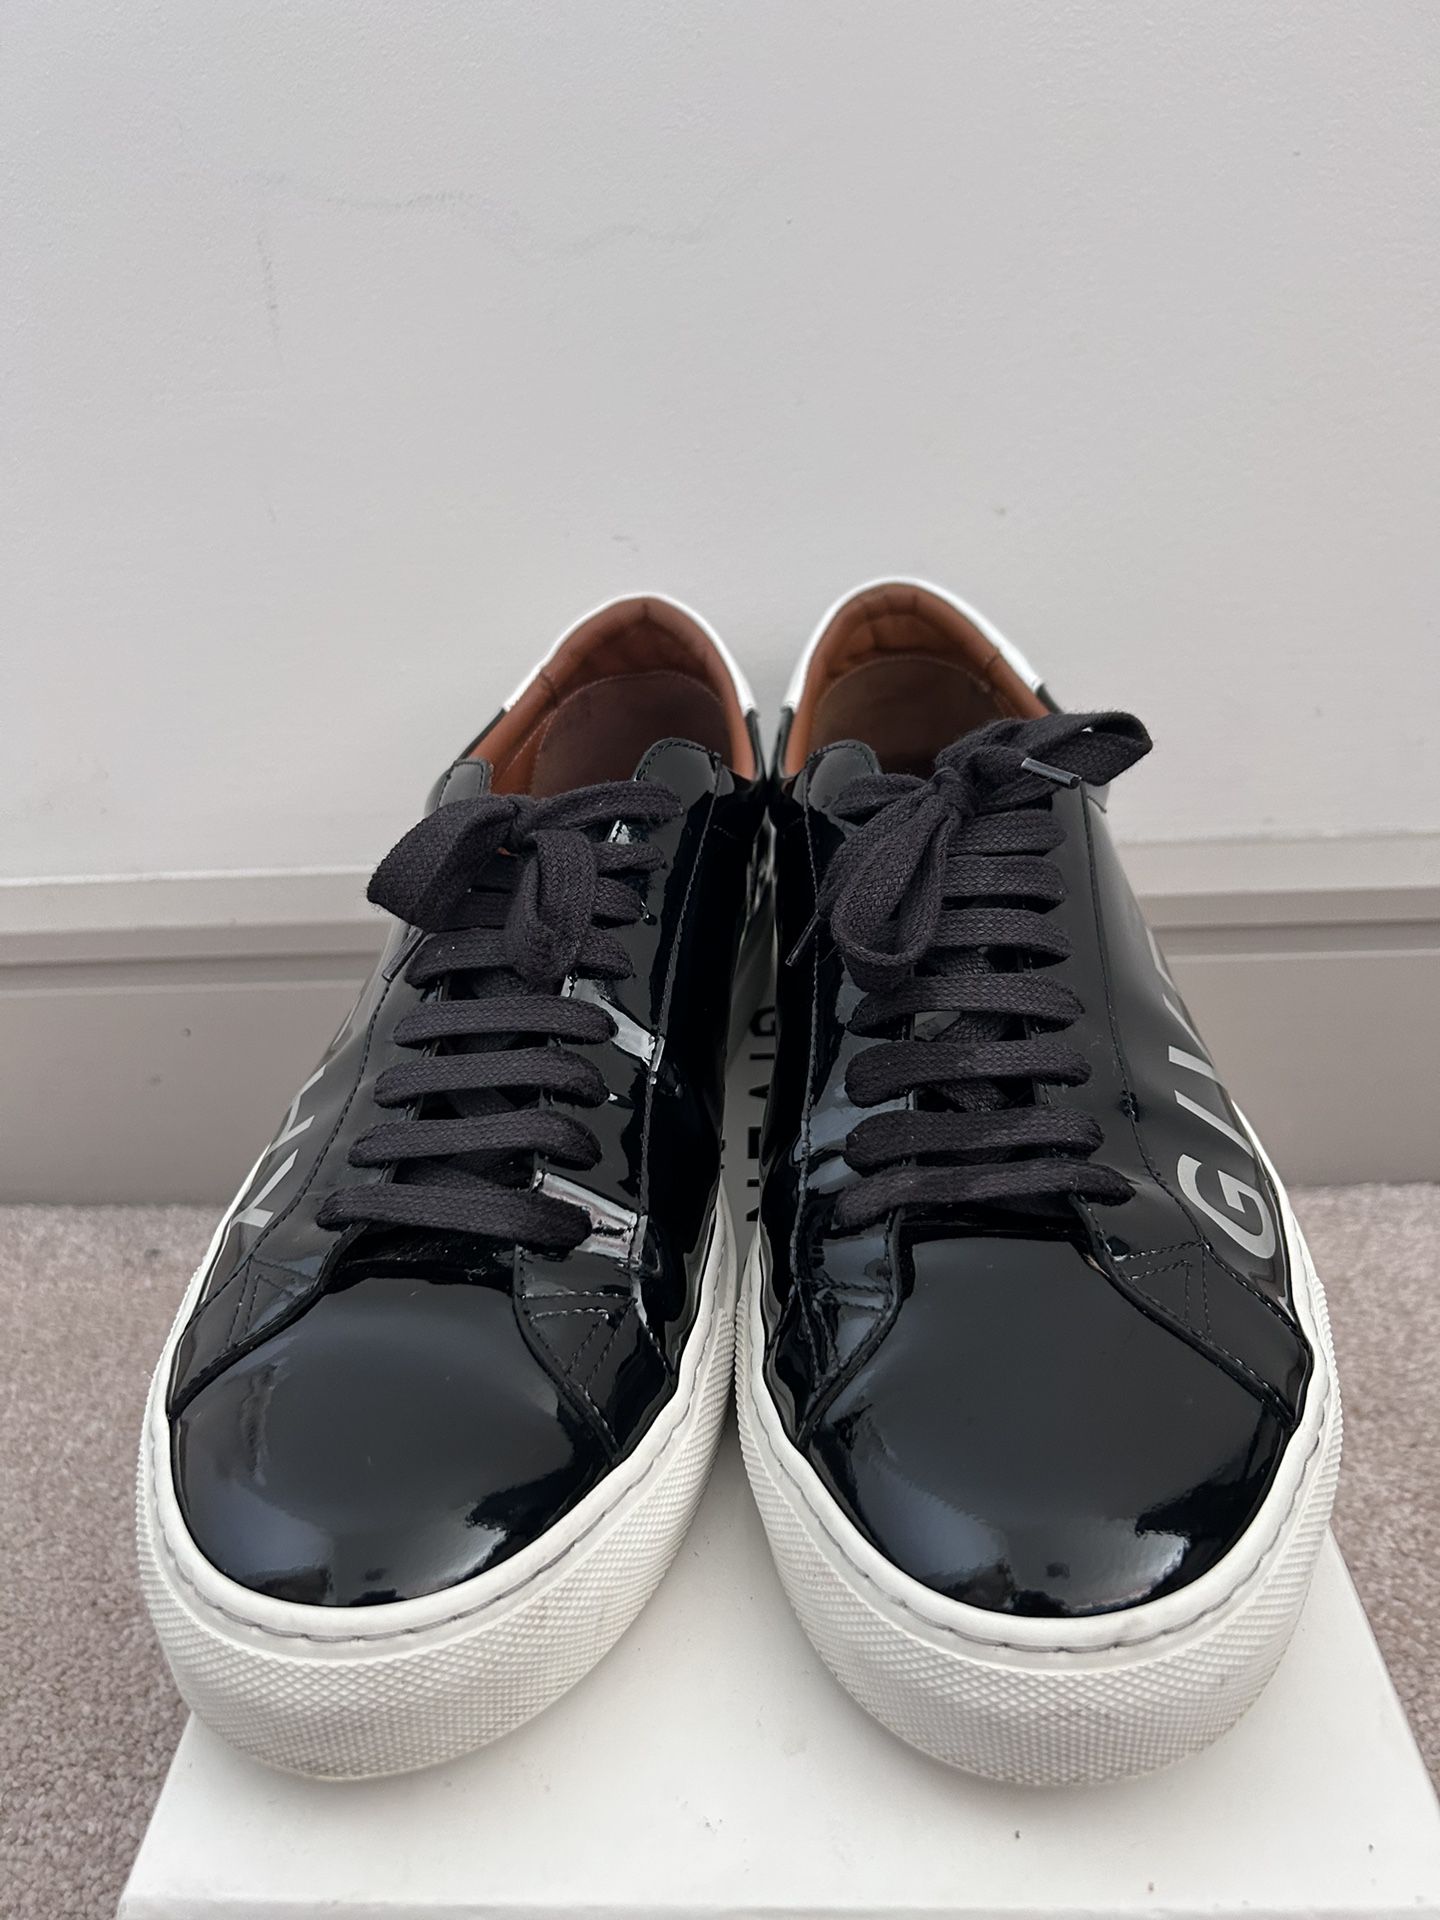 Reduktion Junction bøf Givenchy Sneakers for Sale in Charlotte, NC - OfferUp